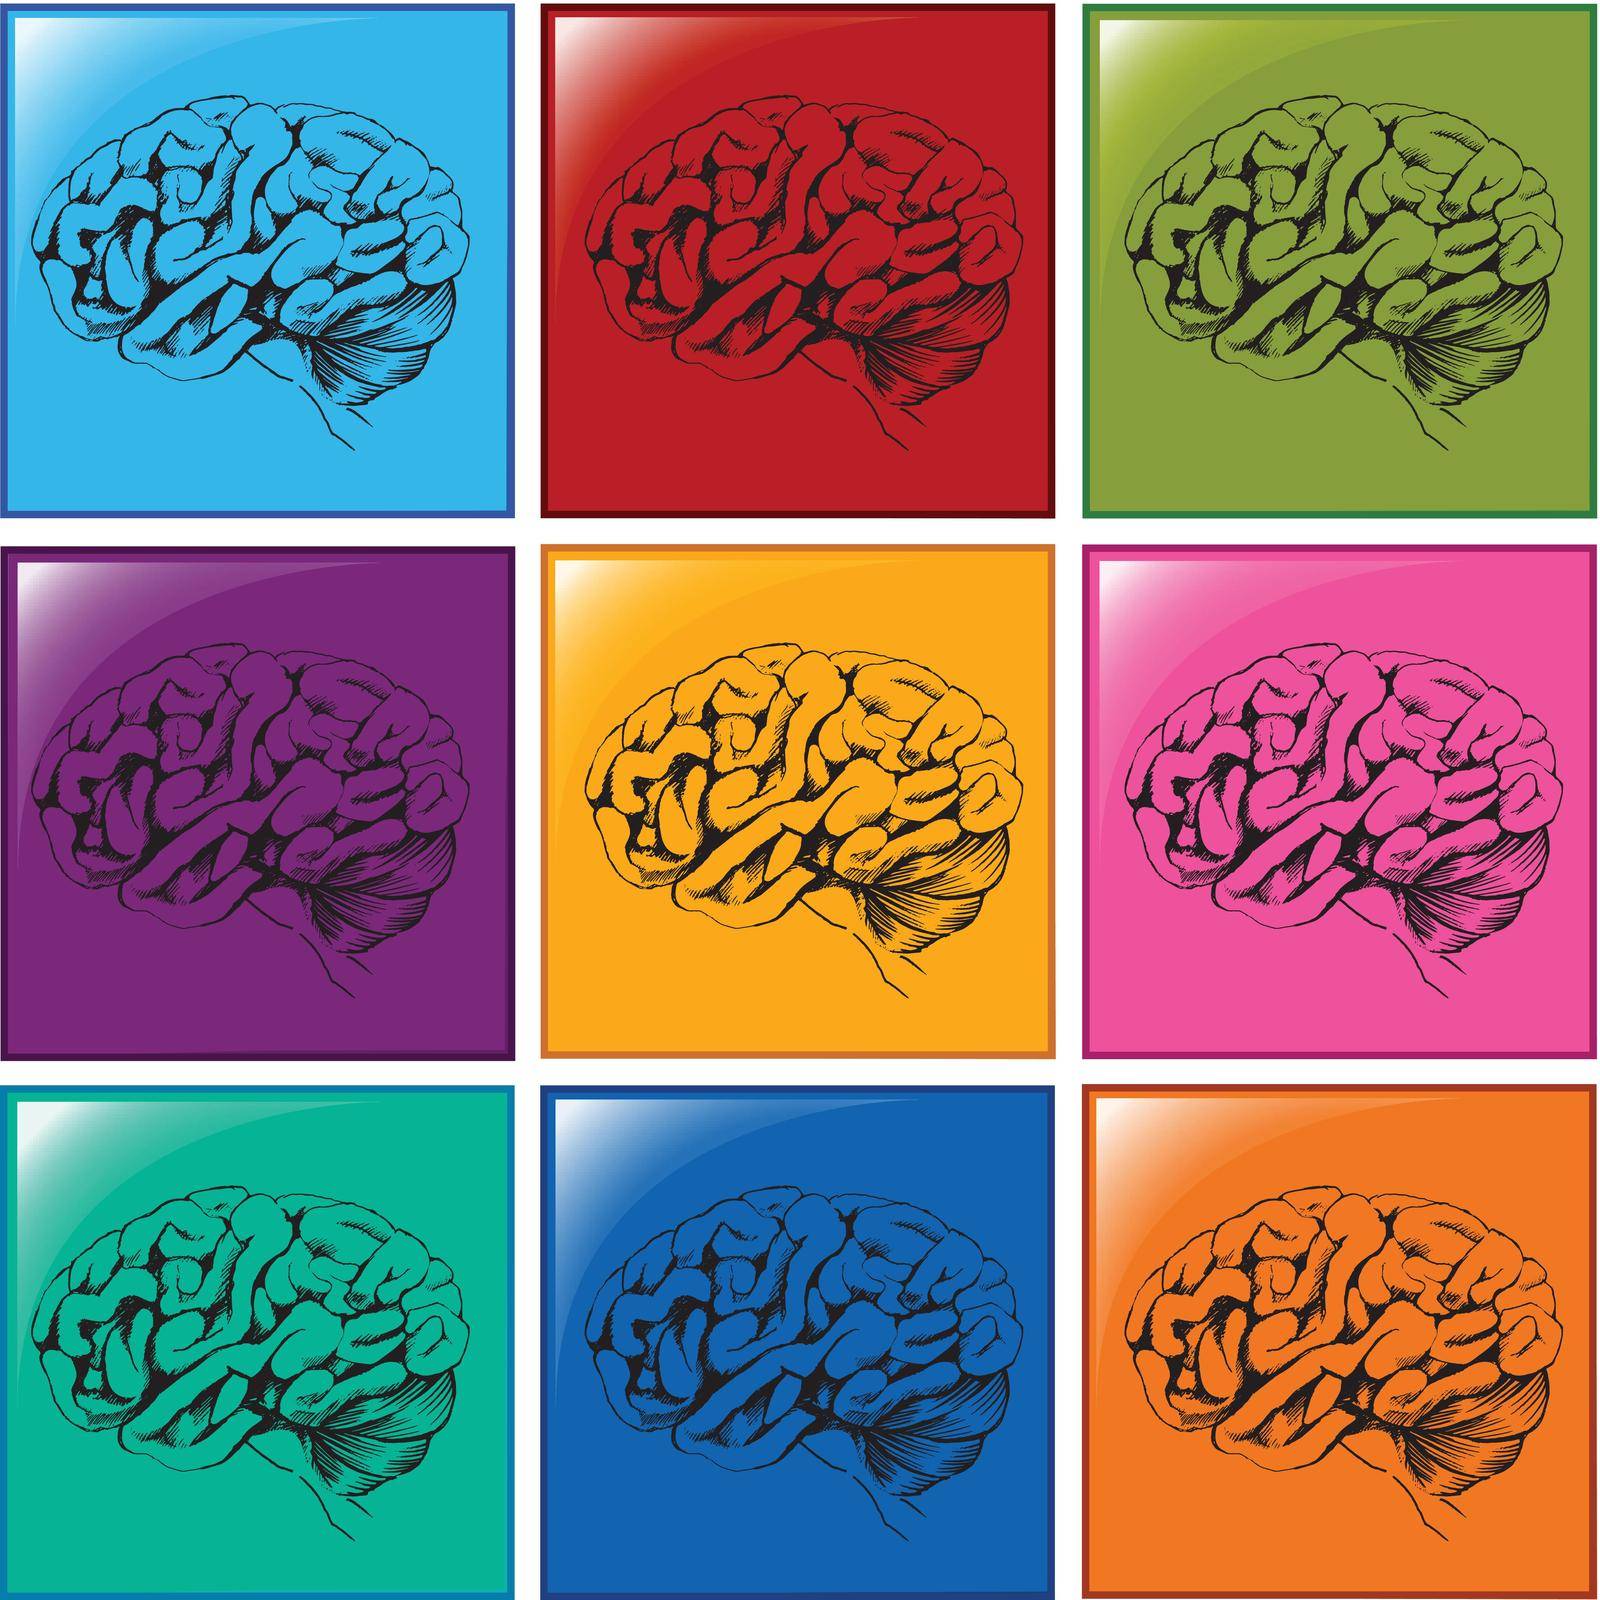 Illustration of the brain icons on a white background